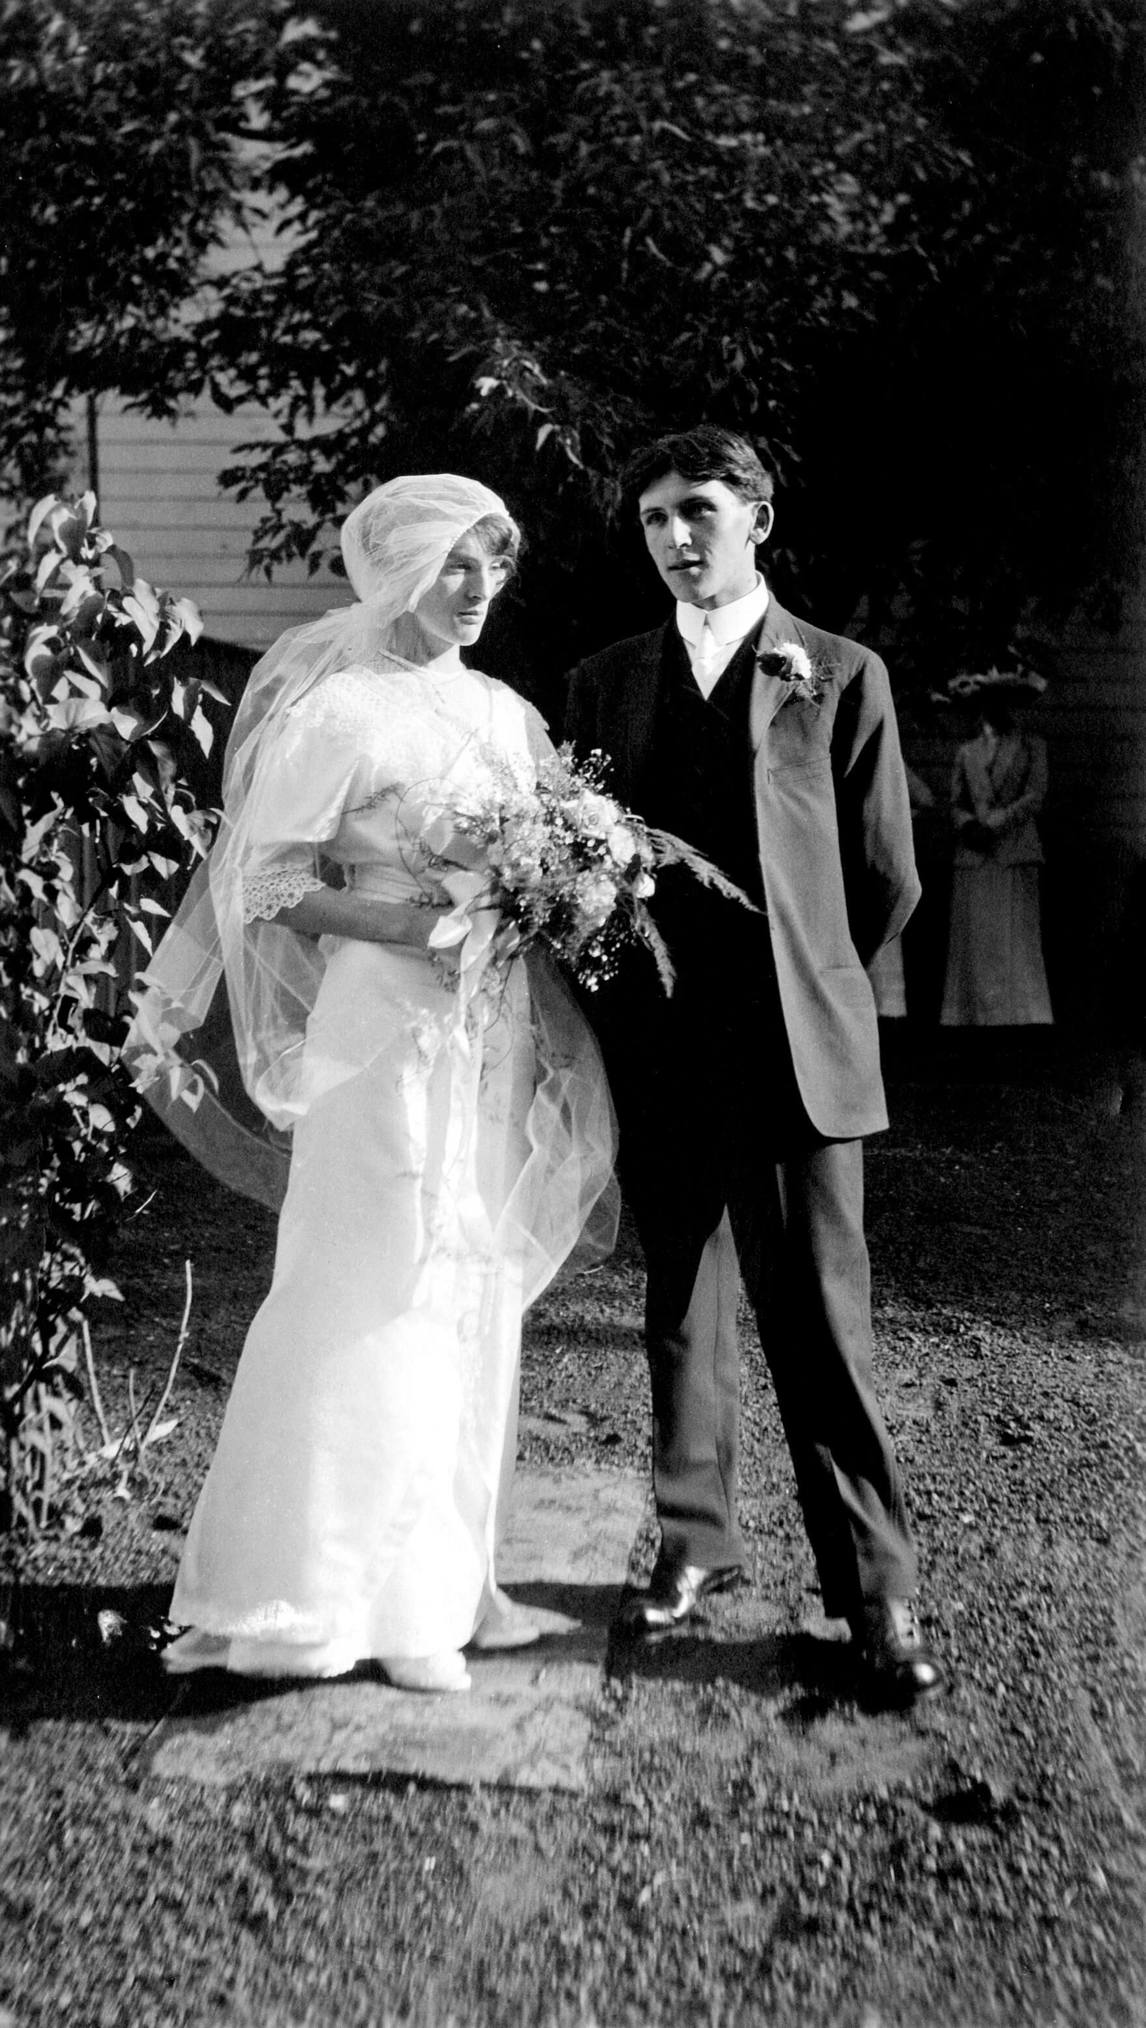 Photograph of Rill Porter and Bertram Brooker on their wedding day, July 3, 1913